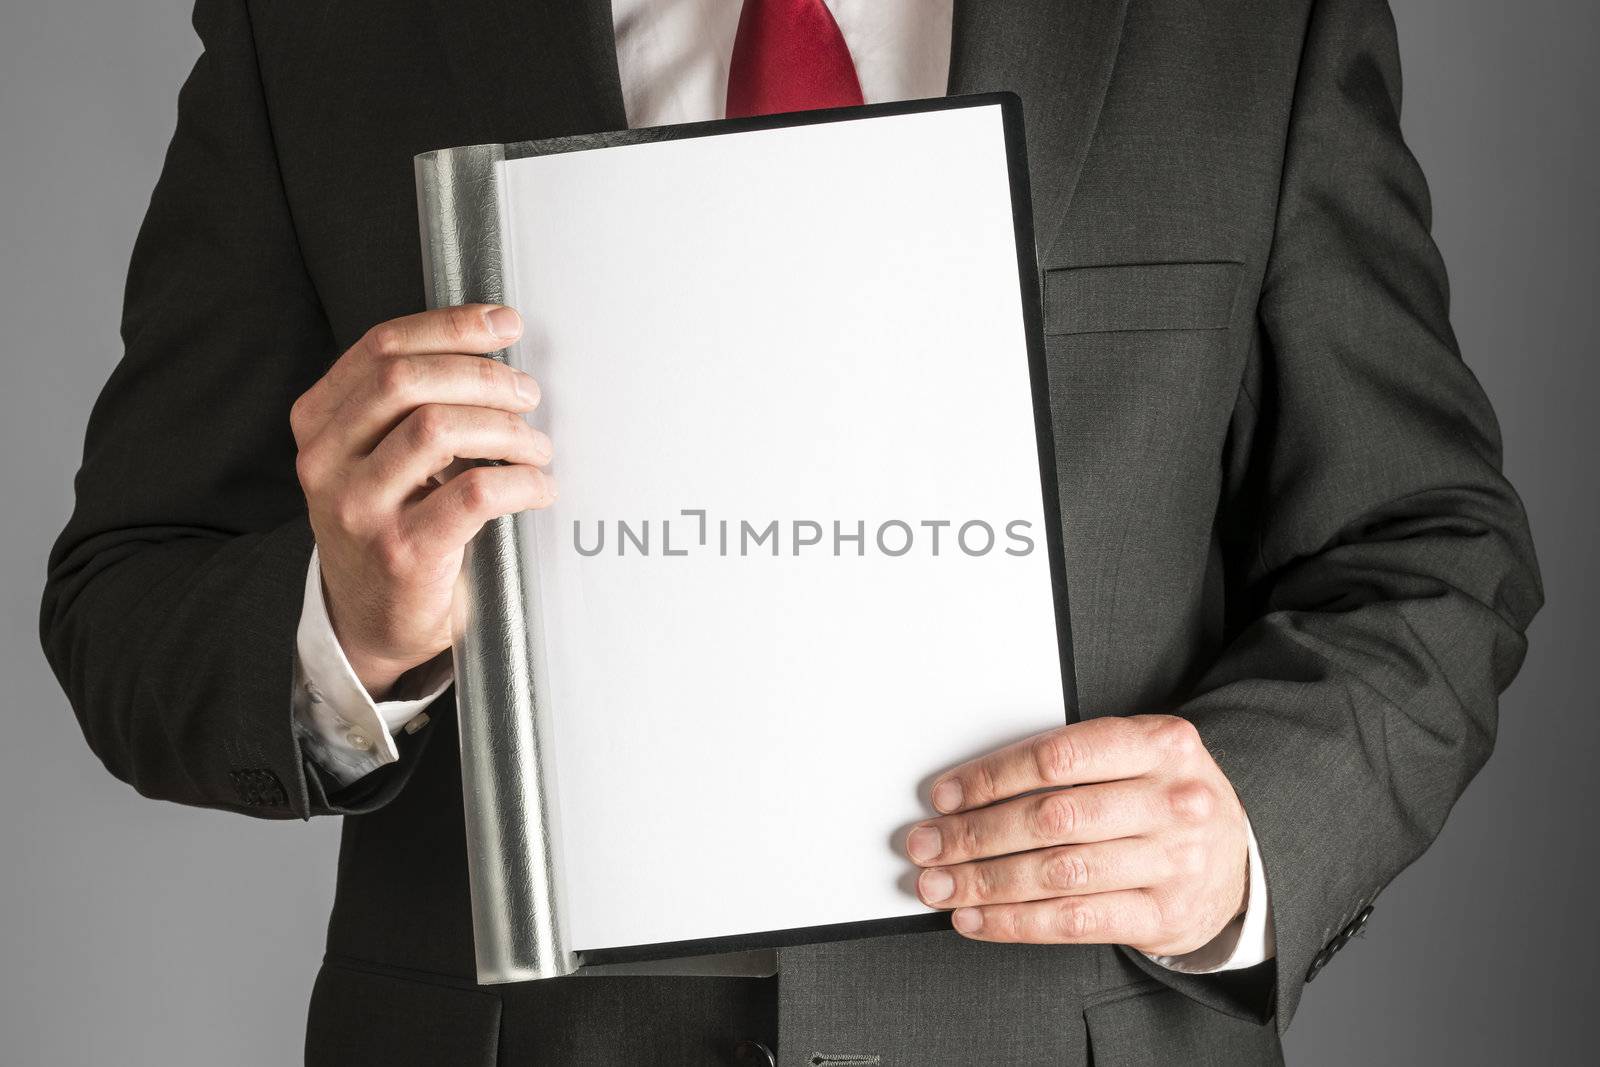 cutout of well dressed business man with red tie and black suite who is holding a folder